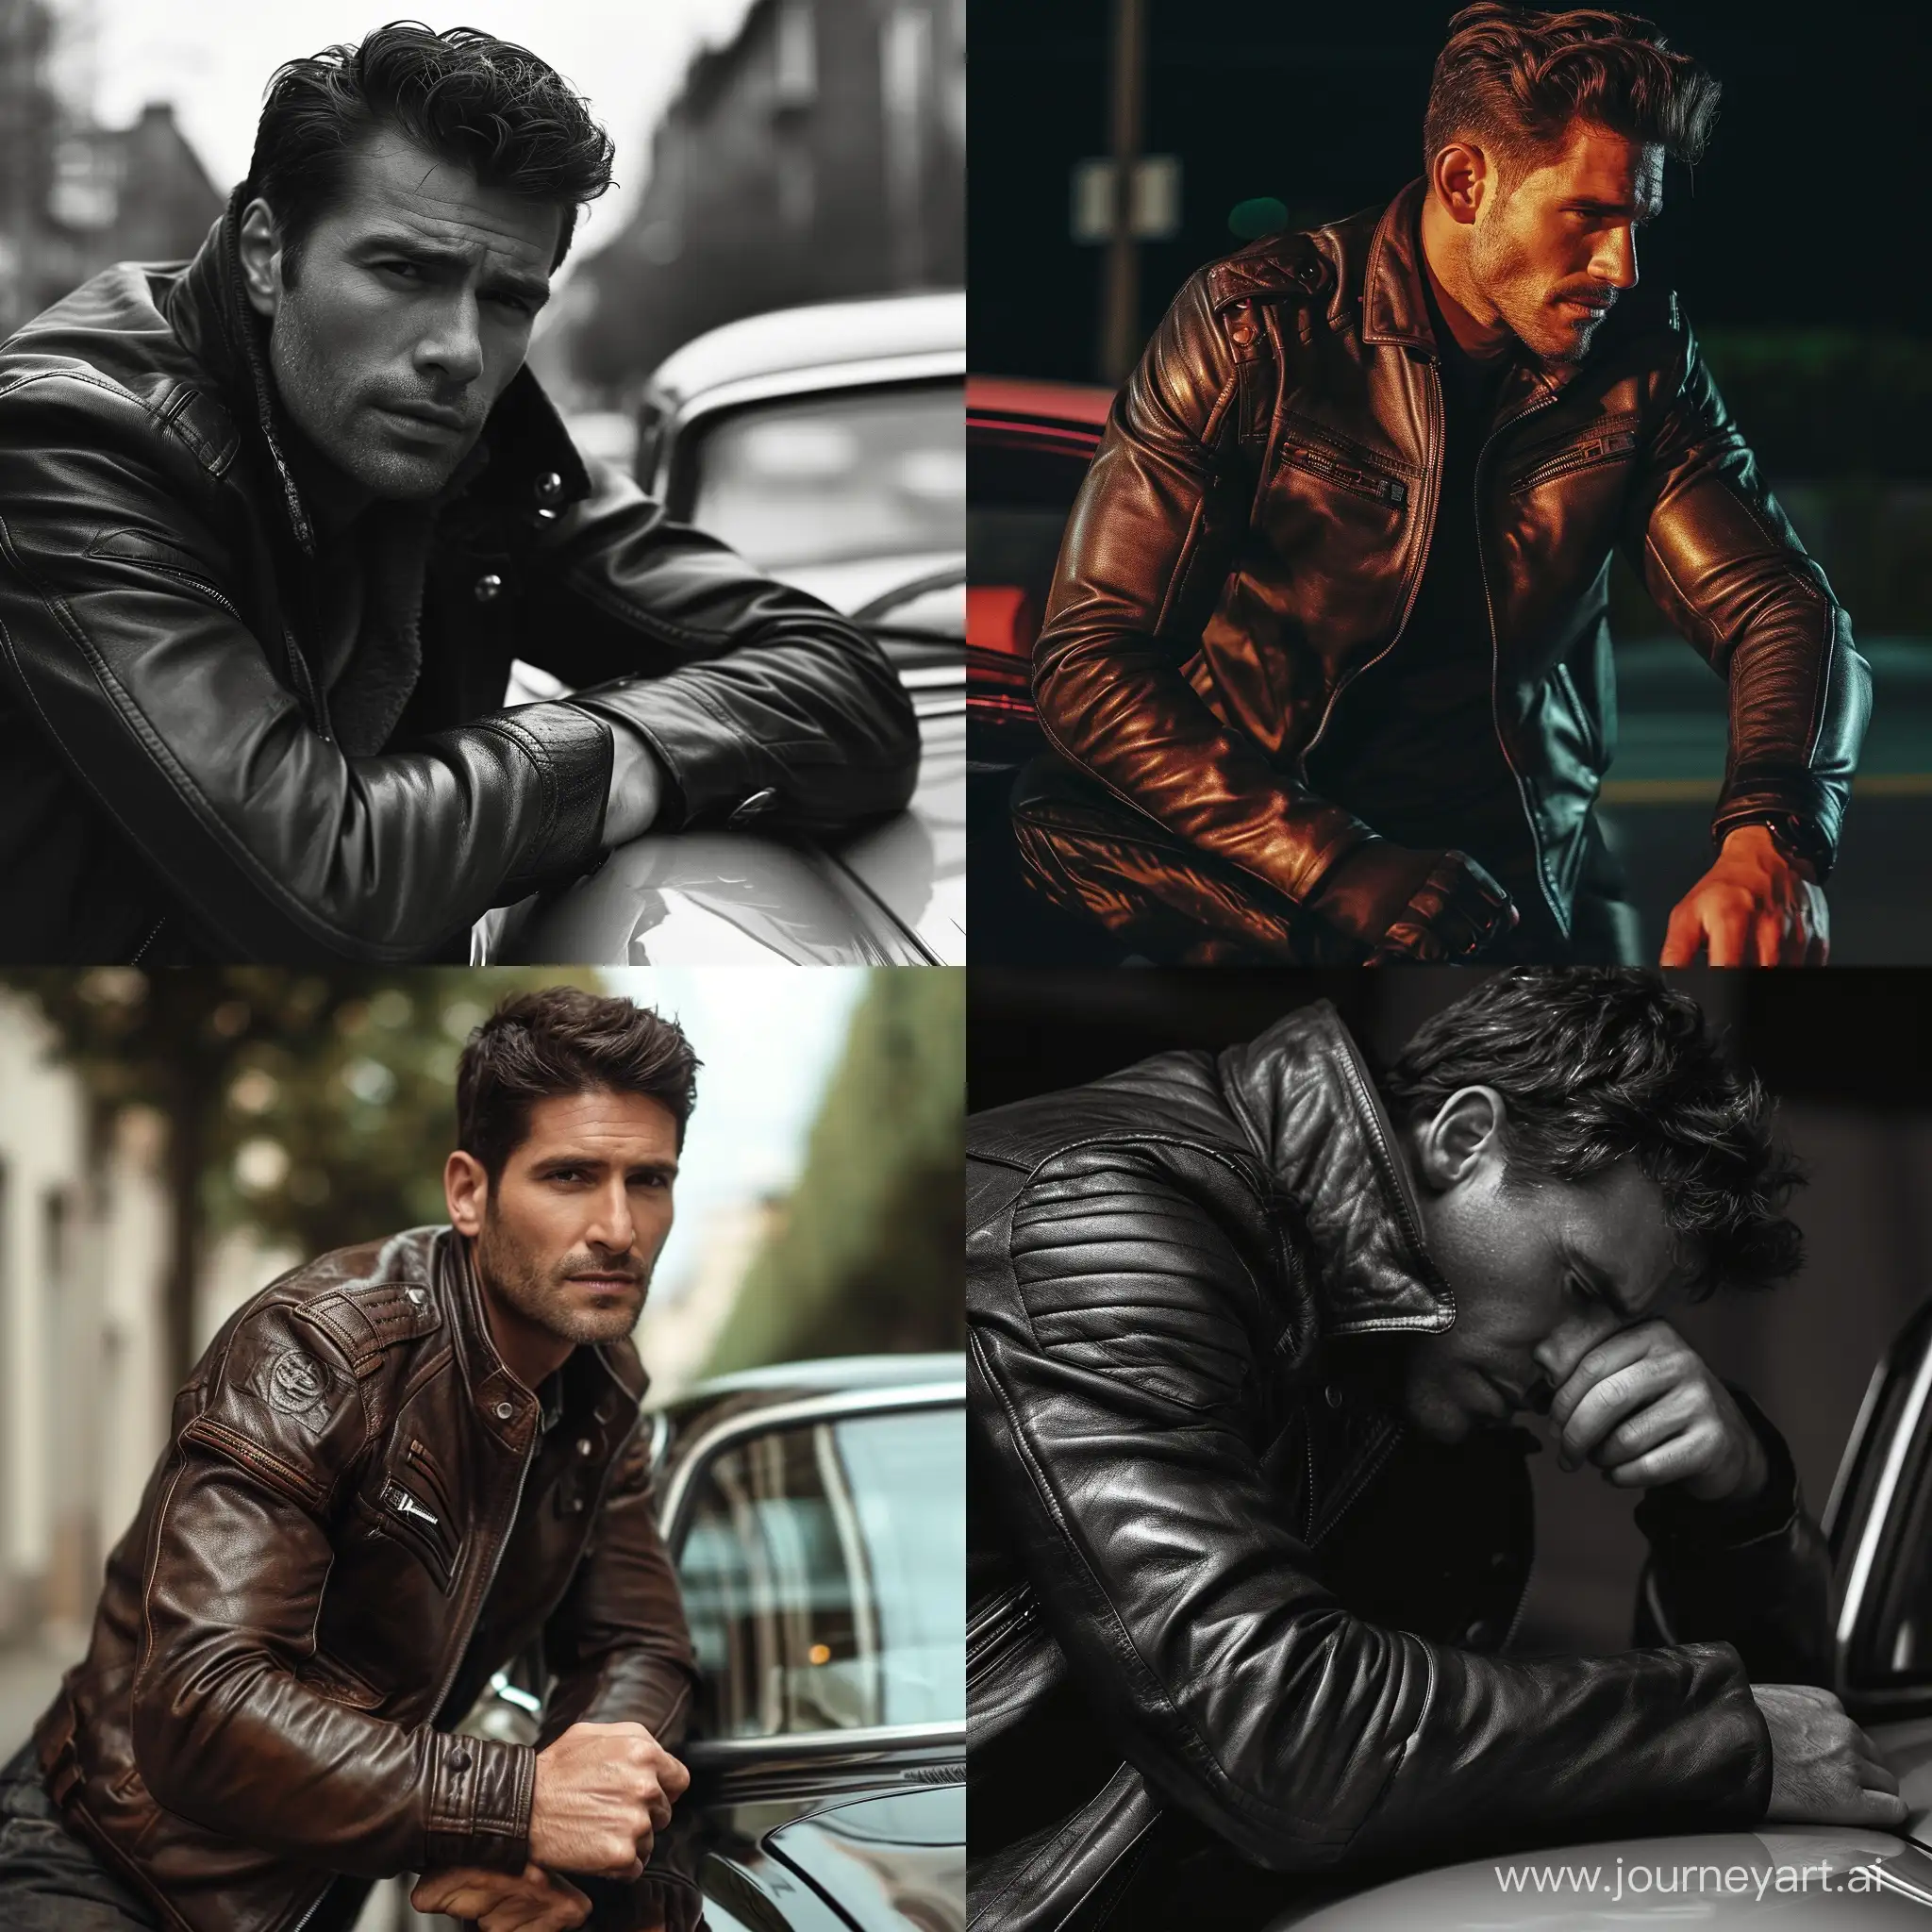 Stylish-Man-Leaning-on-Car-in-Trendy-Leather-Jacket